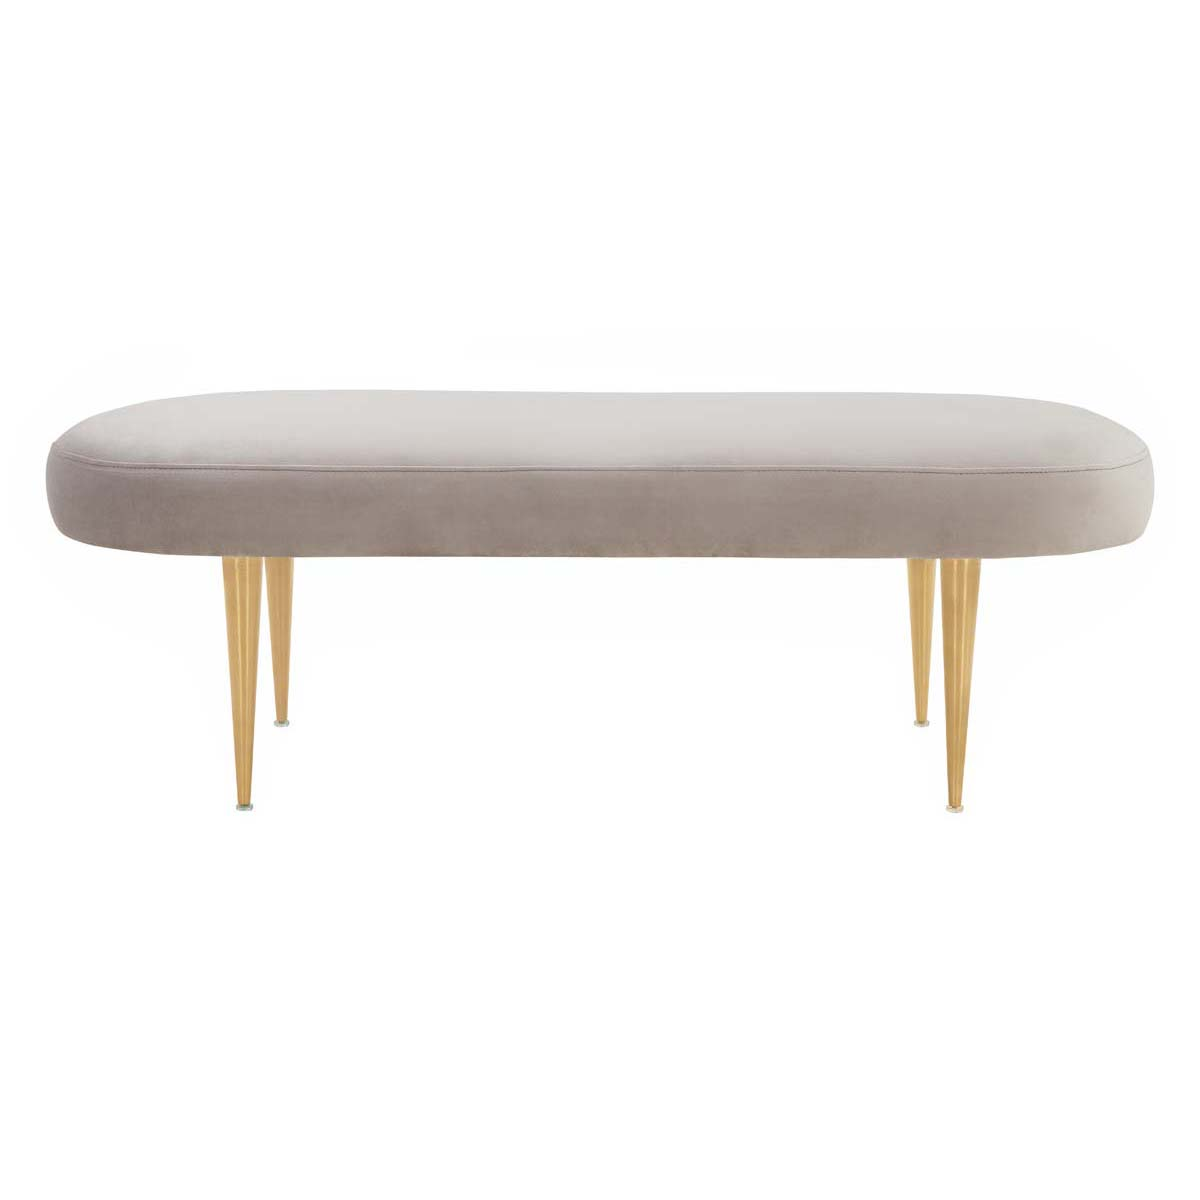 Safavieh Couture Corinne Oval Bench - Pale Taupe